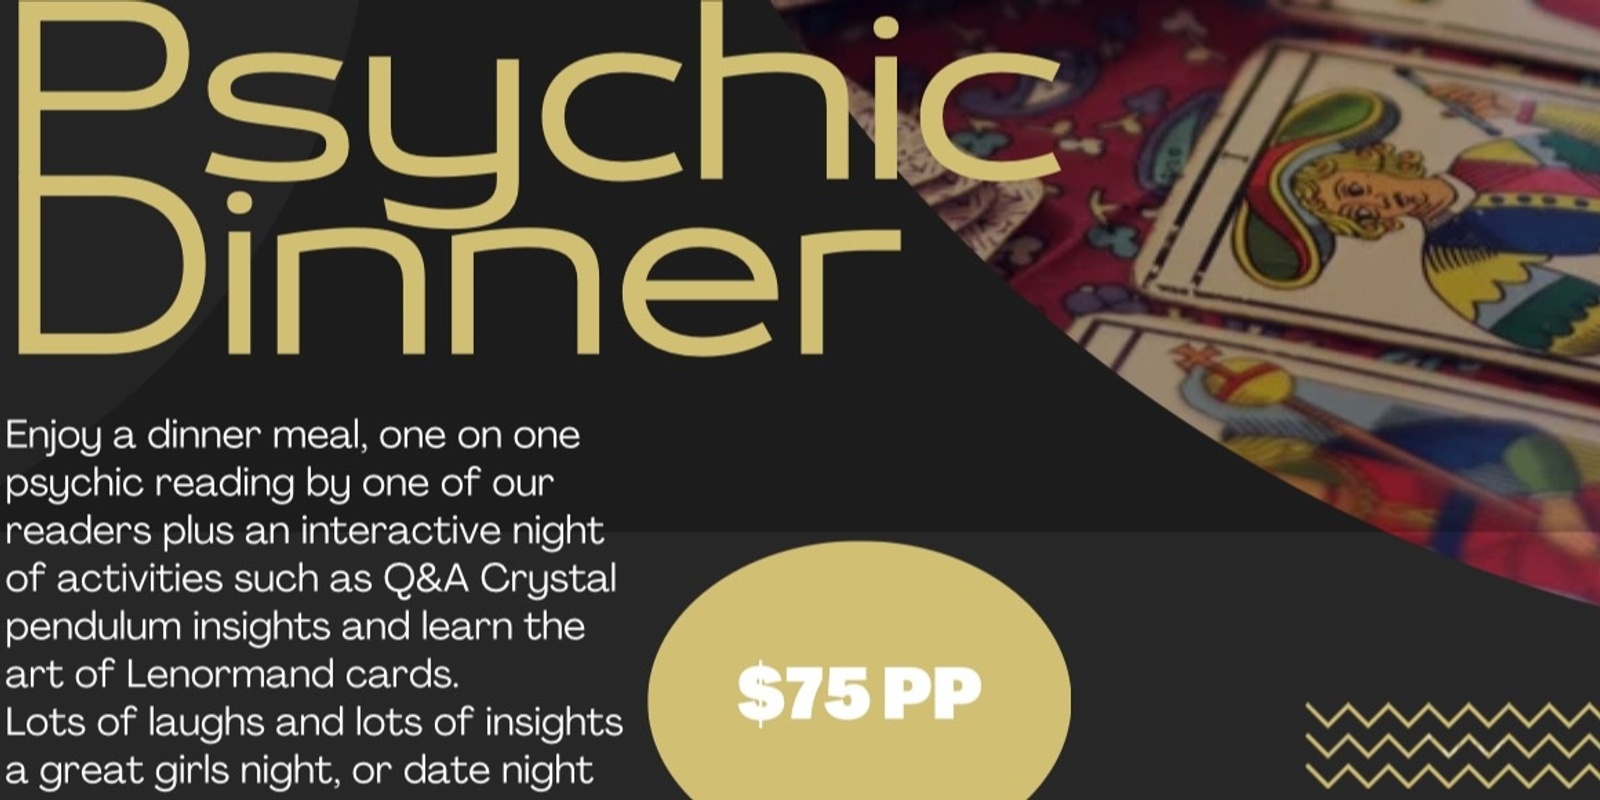 Banner image for Psychic Dinner @Seaford hotel 12th August